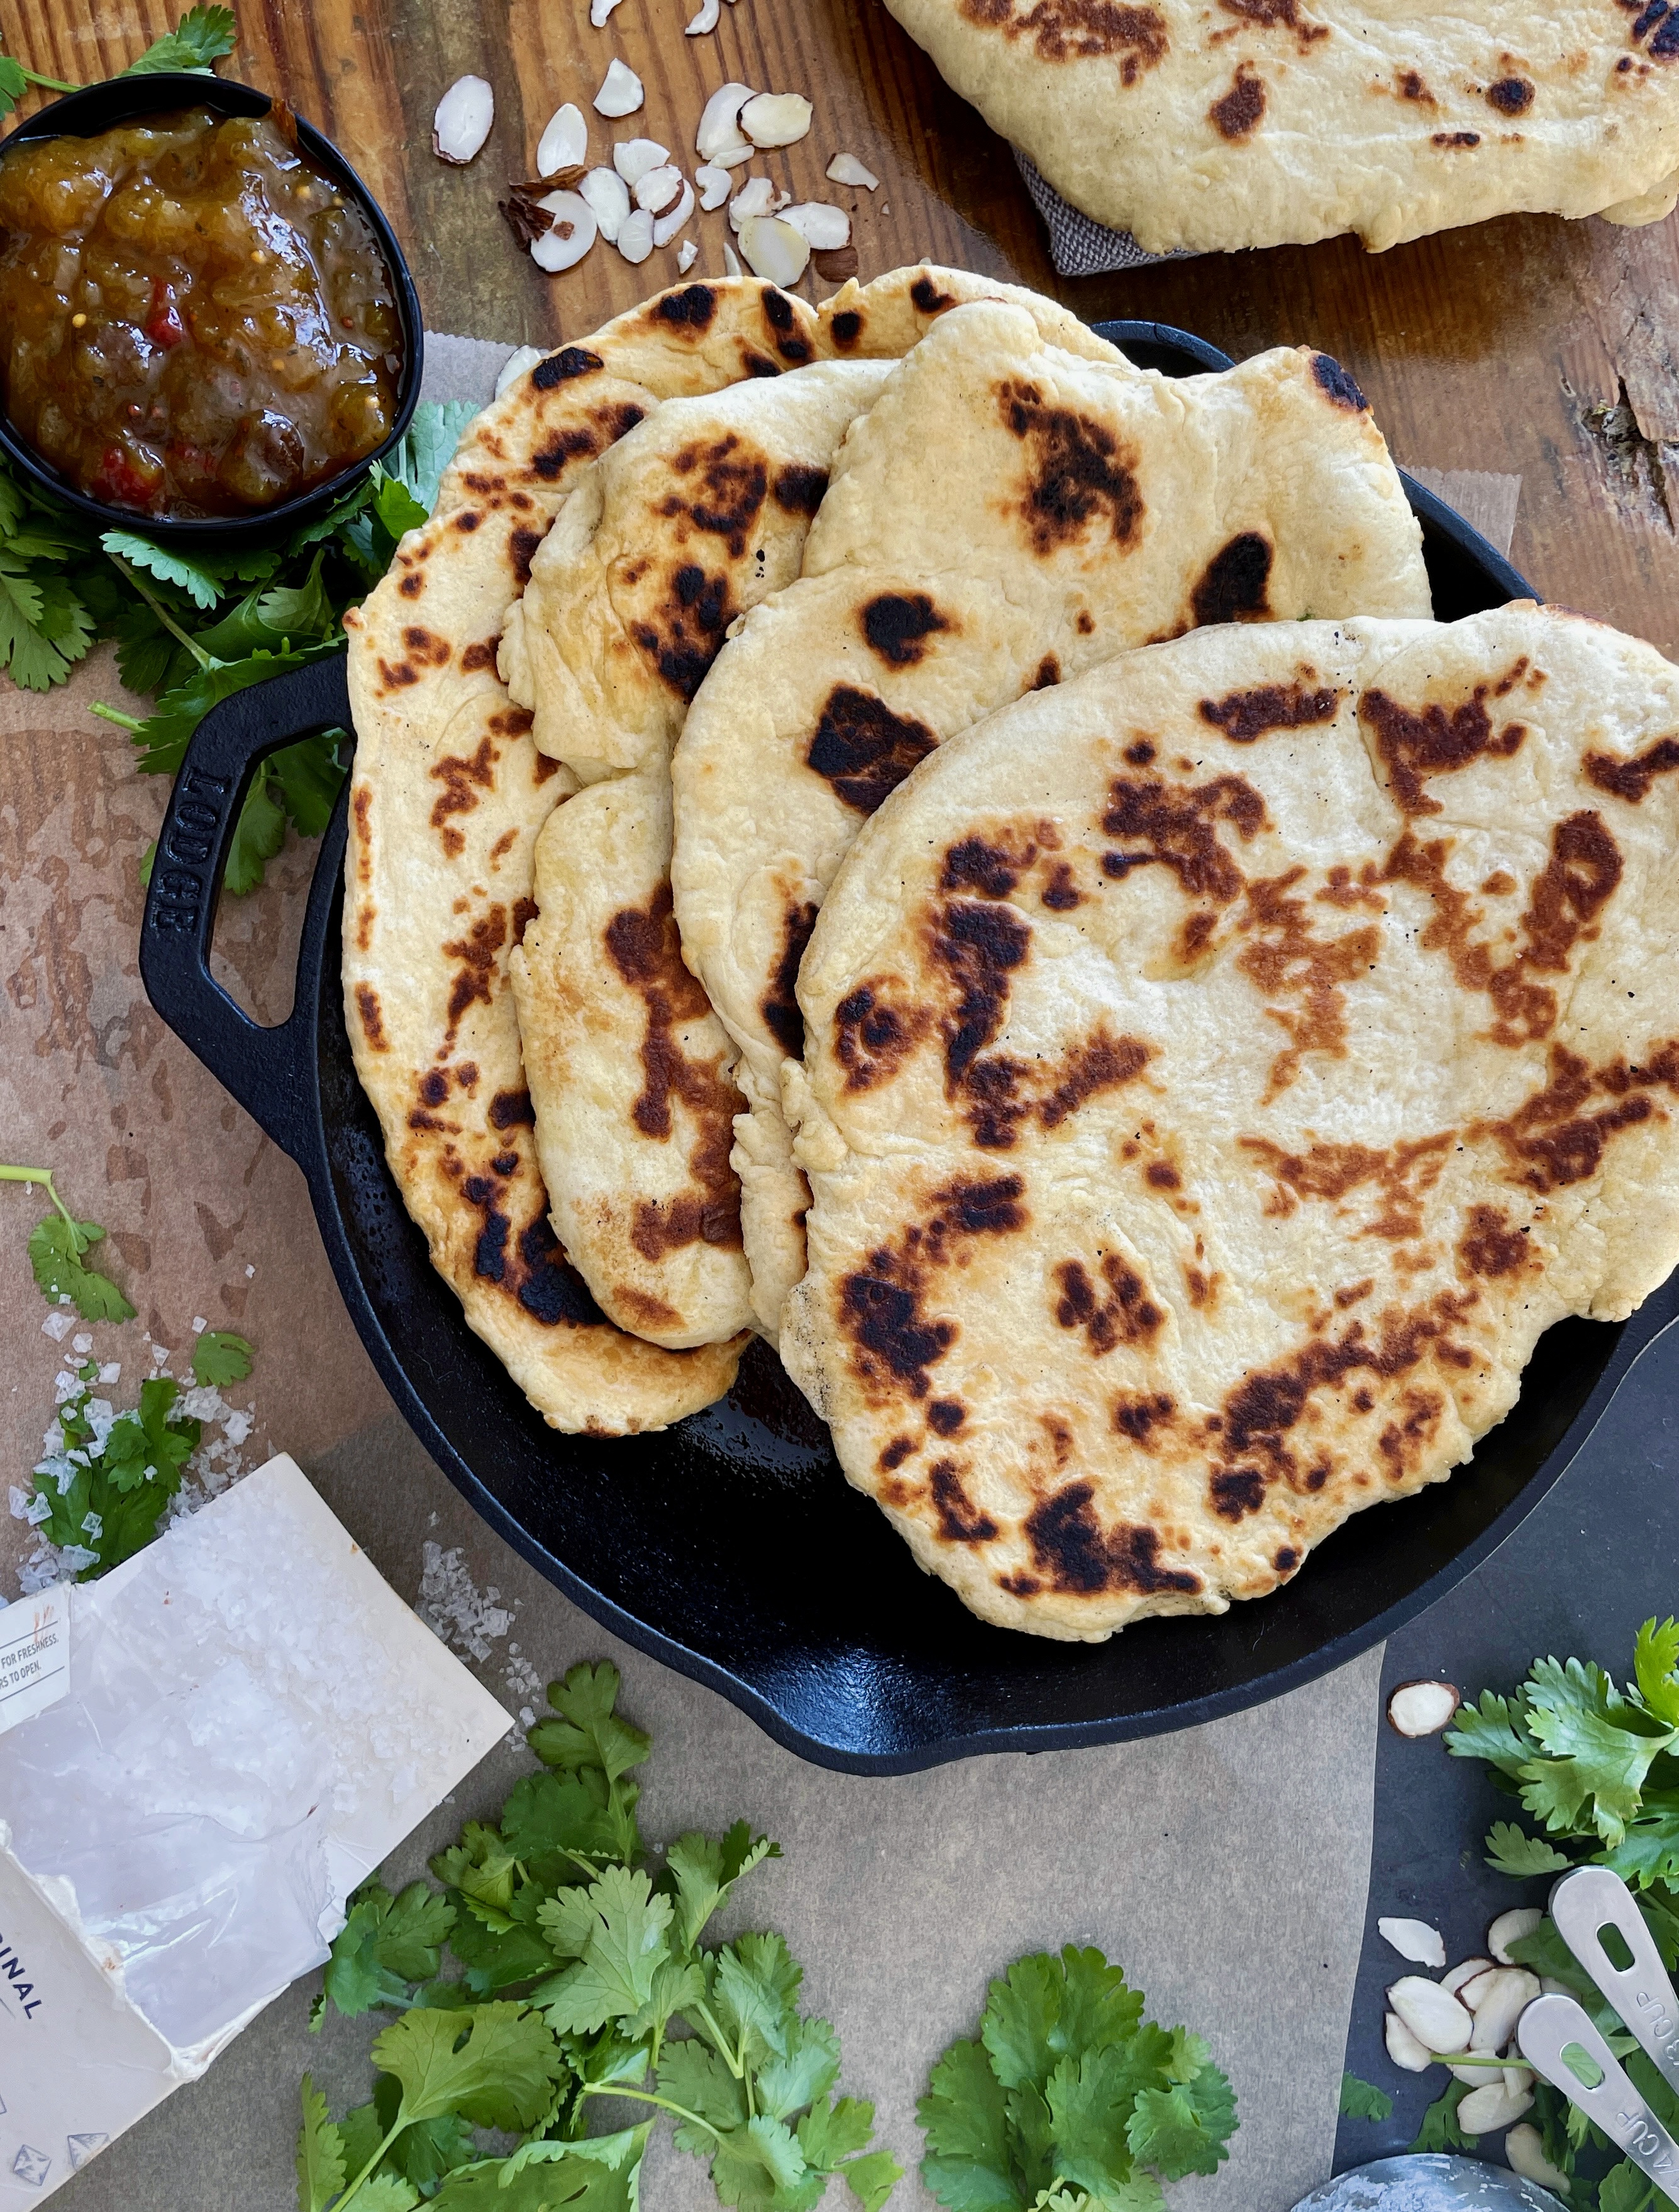 A fluffy, warm doughy exterior with crispy pan fried edges: this Easy Homemade Naan is truly a staple in my house.